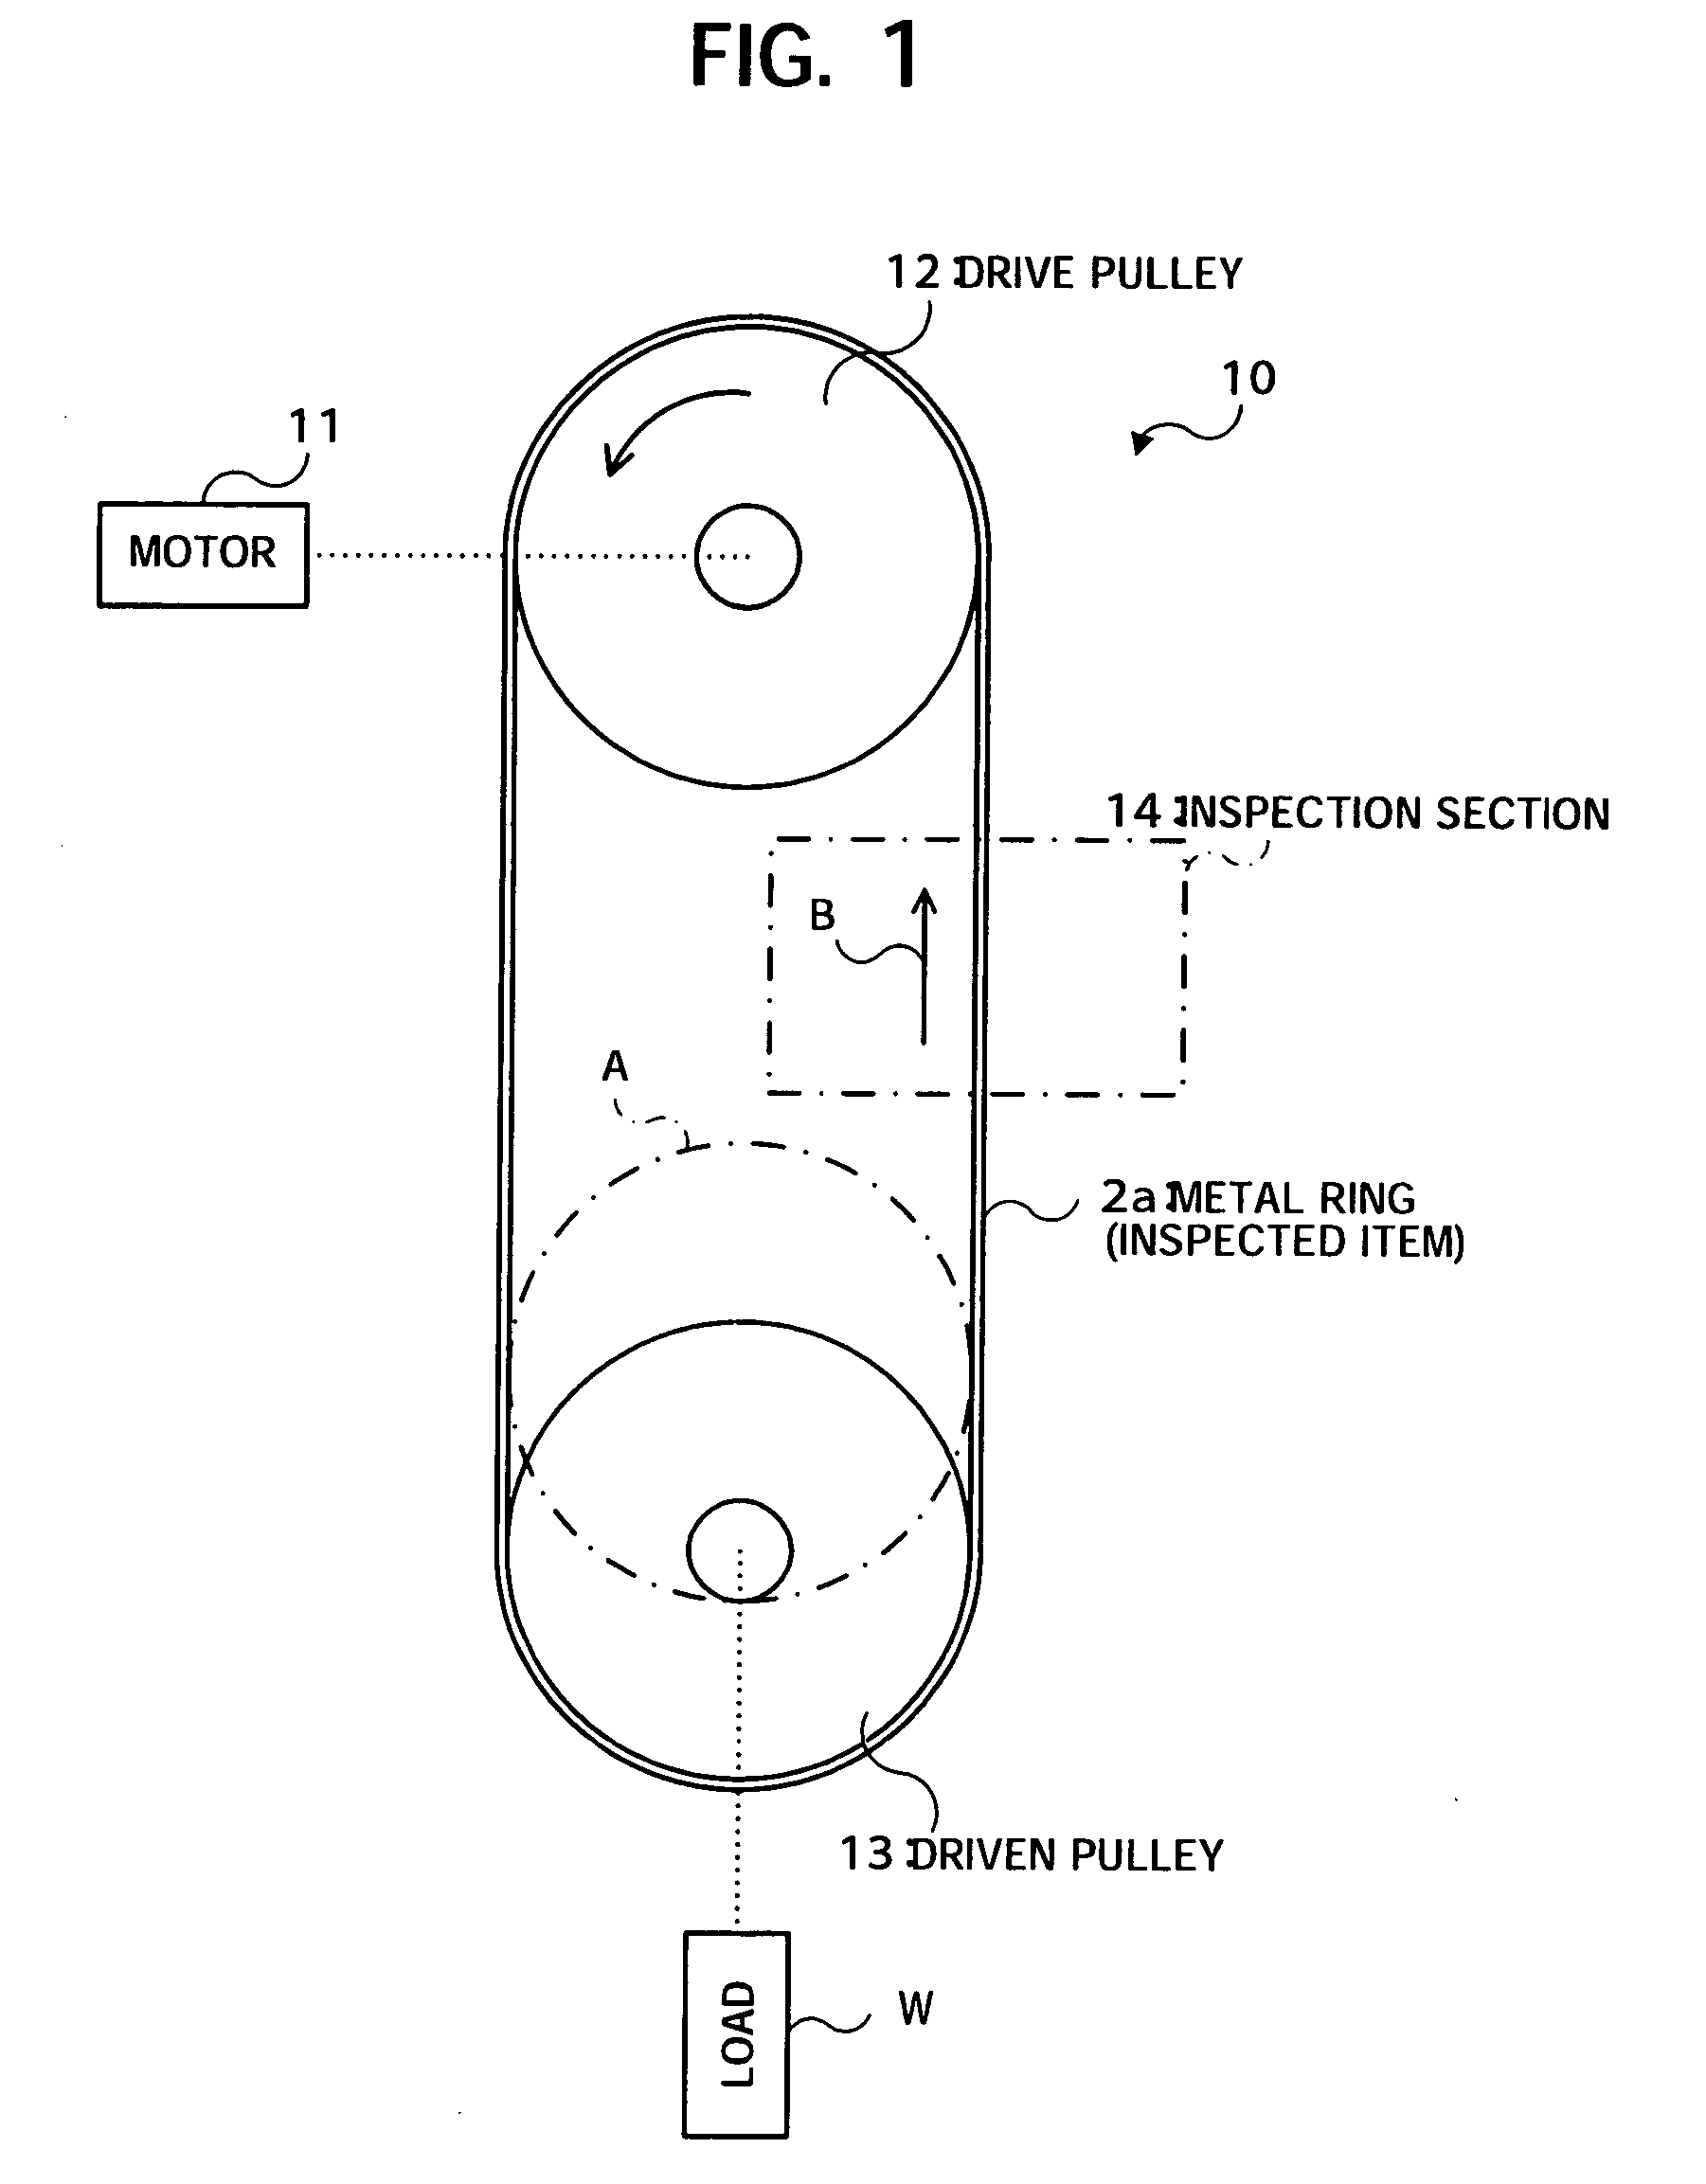 Metal surface inspection device for metal rings of a continuously variable transmission belt